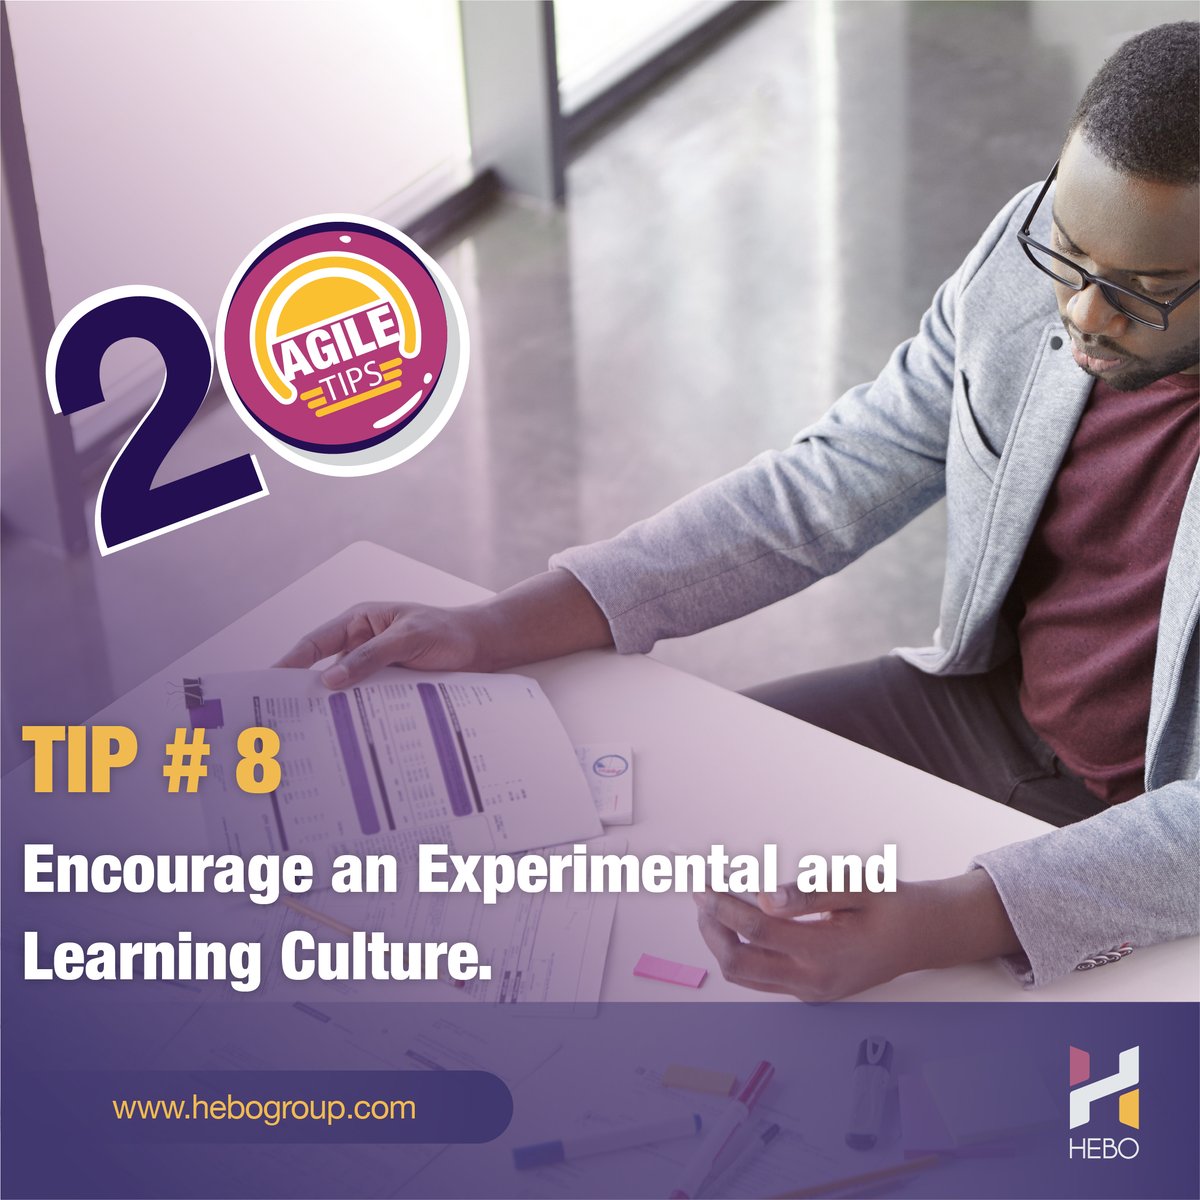 Tip #8 for Agile success: Foster innovation & growth with an experimental and learning culture. We've got expert tips to help you embrace new ideas and continuous learning - check out our blog for all 20! 💡 #AgileLife #InnovationCulture #LearningGoals